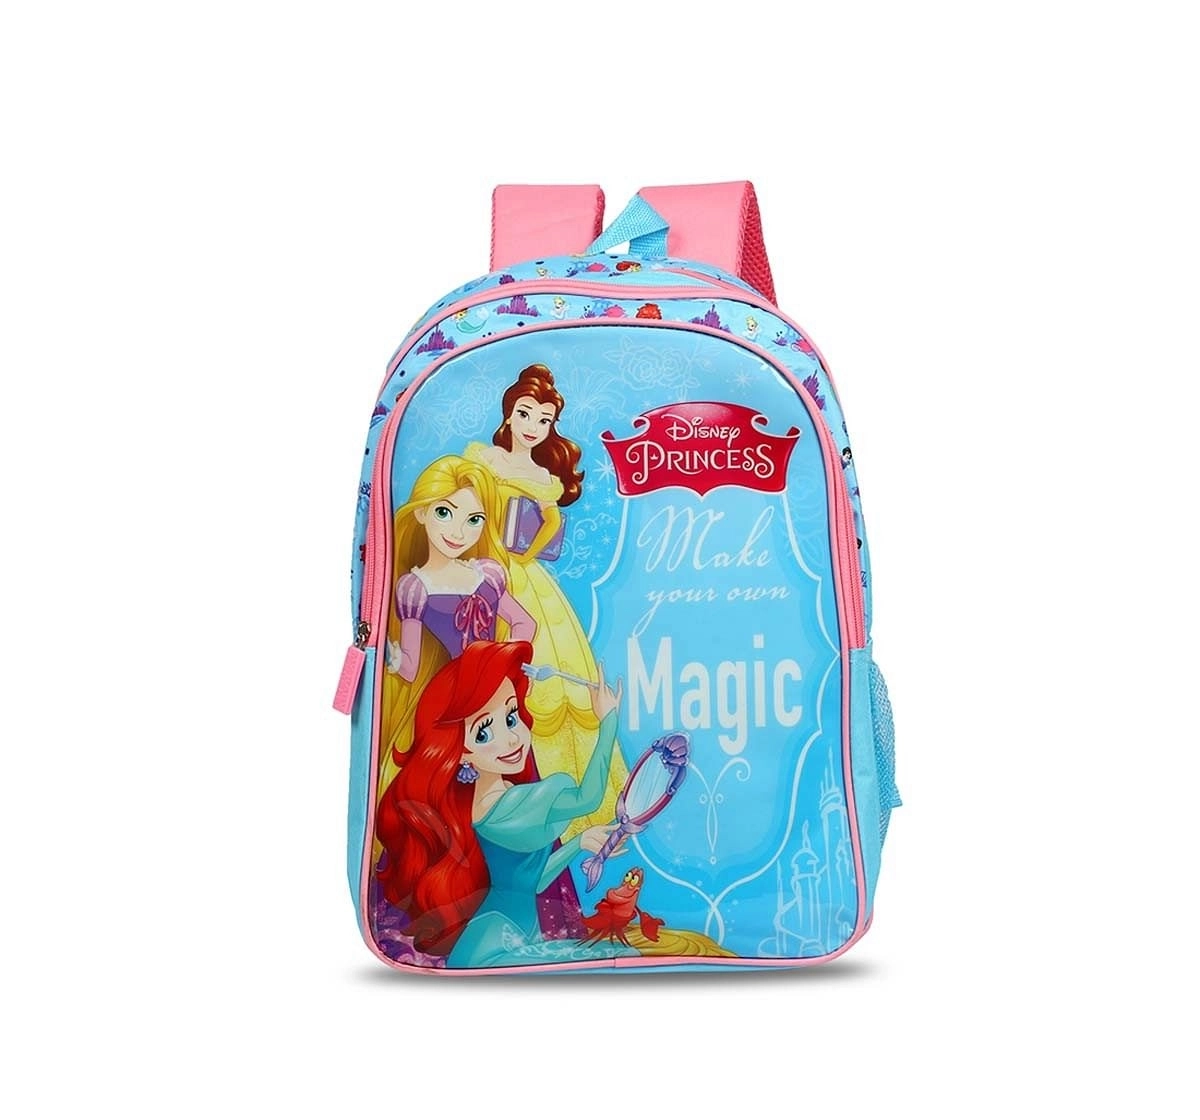 Excel Production Disney Princess Make Your Own Magic School Bag 41 Cm Bags for Age 7Y+